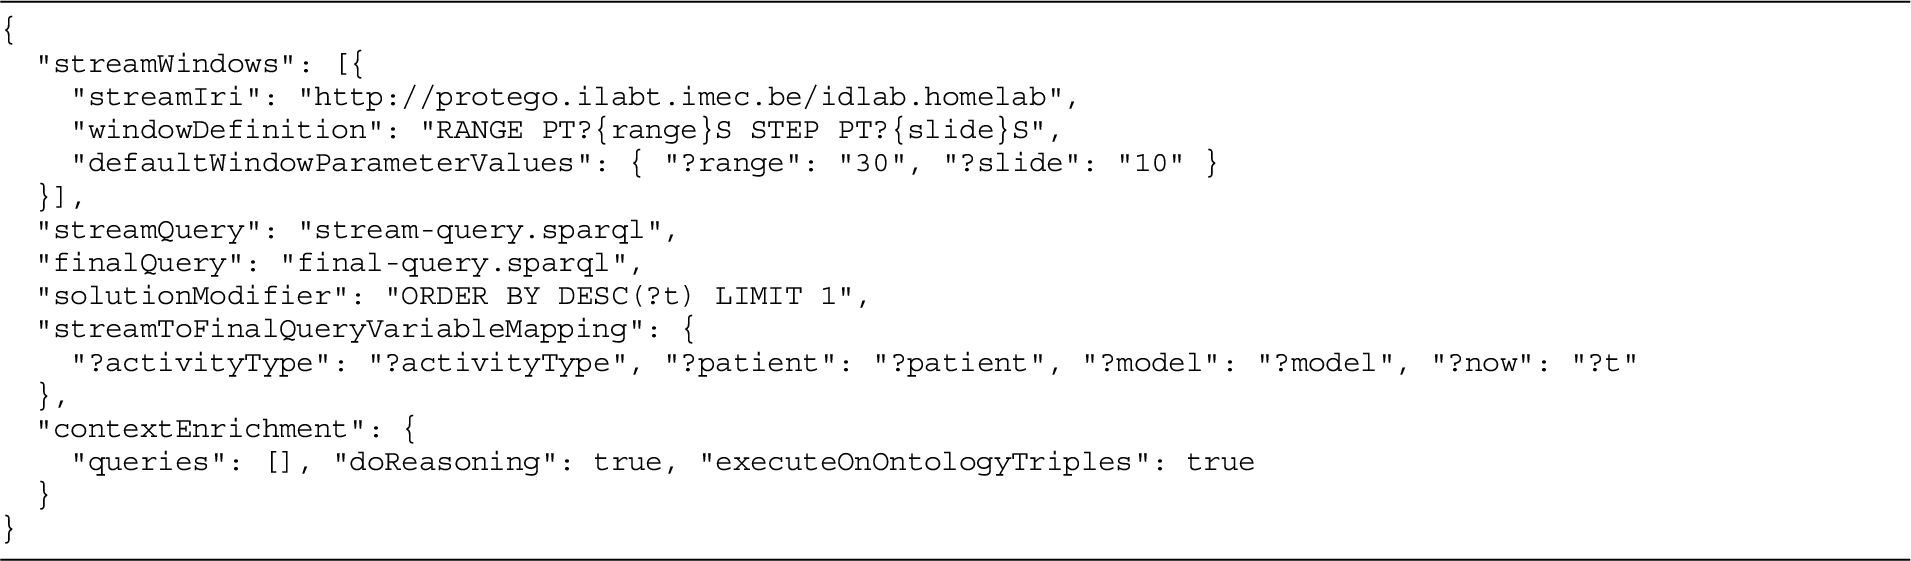 End user definition of the DIVIDE query of the running example that performs the monitoring of the showering activity rule. The content of the file named stream-query.sparql is presented in Listing 12, the content of the file named final-query.sparql is presented in Listing 13.